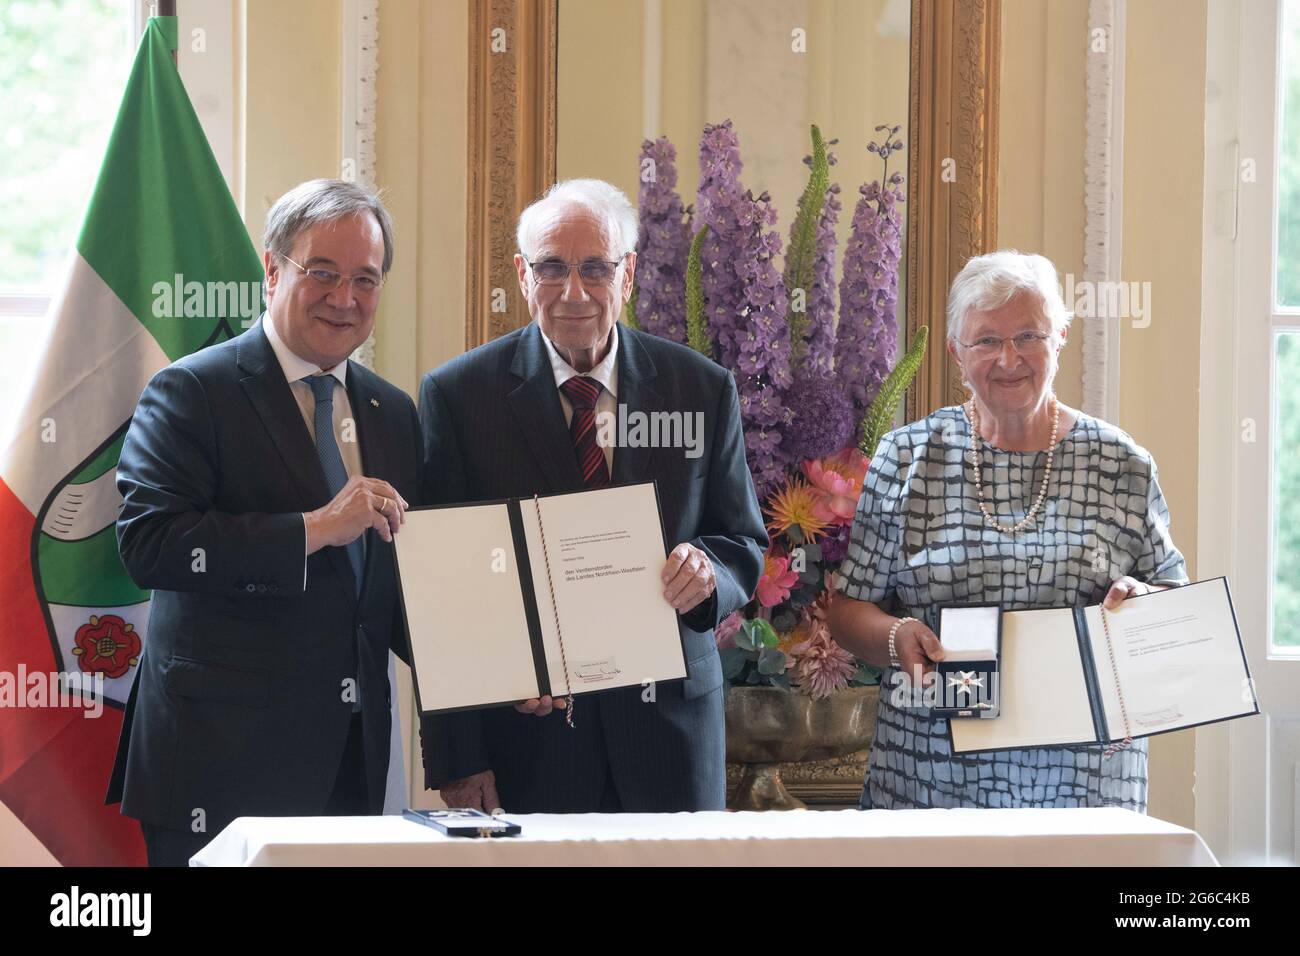 Duesseldorf, Deutschland. 28th June, 2021. Prime Minister Armin LASCHET, honors the married couple Ursula and Heribert HOELZ, HÃ¶lz, Prime Minister Armin Laschet honors citizens of North Rhine-Westphalia for their exceptional commitment to society with the Order of Merit of the State, award of the Order of Merit of the State of North Rhine-Westphalia Westphalia in Duesseldorf on June 28th, 2021 ÃÂ Credit: dpa/Alamy Live News Stock Photo